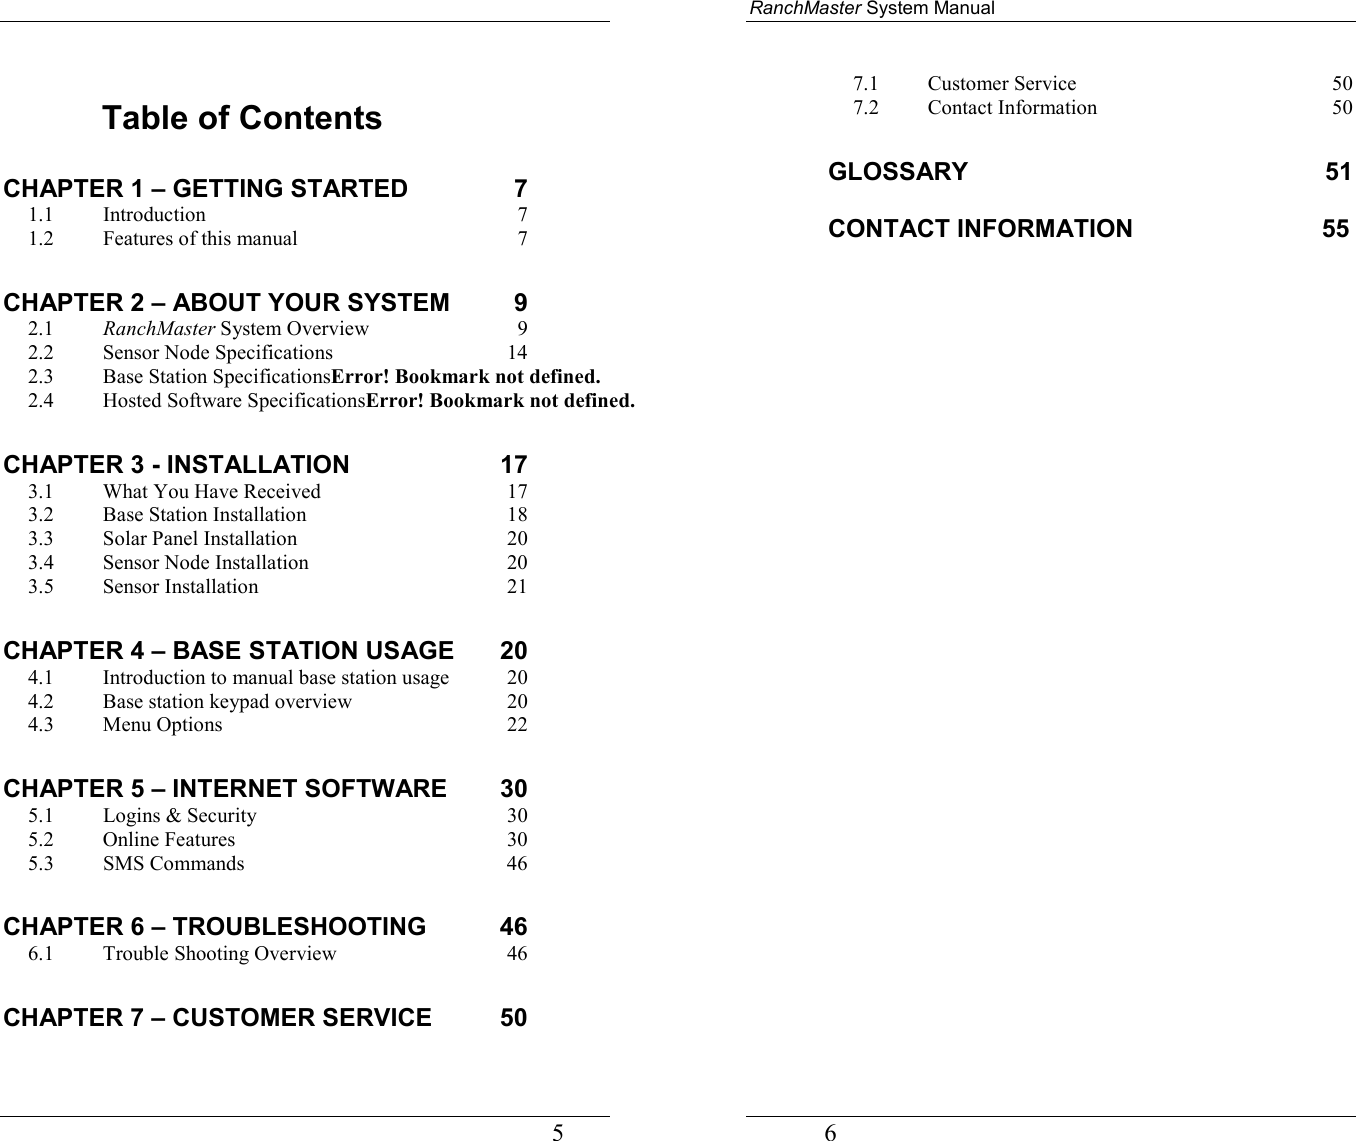                                                                                   5  Table of Contents CHAPTER 1 – GETTING STARTED  7 1.1 Introduction 7 1.2 Features of this manual  7 CHAPTER 2 – ABOUT YOUR SYSTEM  9 2.1 RanchMaster System Overview  9 2.2   Sensor Node Specifications  14 2.3   Base Station SpecificationsError! Bookmark not defined. 2.4   Hosted Software SpecificationsError! Bookmark not defined. CHAPTER 3 - INSTALLATION  17 3.1   What You Have Received  17 3.2   Base Station Installation  18 3.3   Solar Panel Installation  20 3.4   Sensor Node Installation  20 3.5   Sensor Installation  21 CHAPTER 4 – BASE STATION USAGE  20 4.1   Introduction to manual base station usage  20 4.2   Base station keypad overview  20 4.3   Menu Options  22 CHAPTER 5 – INTERNET SOFTWARE  30 5.1   Logins &amp; Security  30 5.2   Online Features  30 5.3   SMS Commands  46 CHAPTER 6 – TROUBLESHOOTING  46 6.1   Trouble Shooting Overview  46 CHAPTER 7 – CUSTOMER SERVICE  50 RanchMaster System Manual             6 7.1   Customer Service  50 7.2   Contact Information  50 GLOSSARY 51  CONTACT INFORMATION          55     